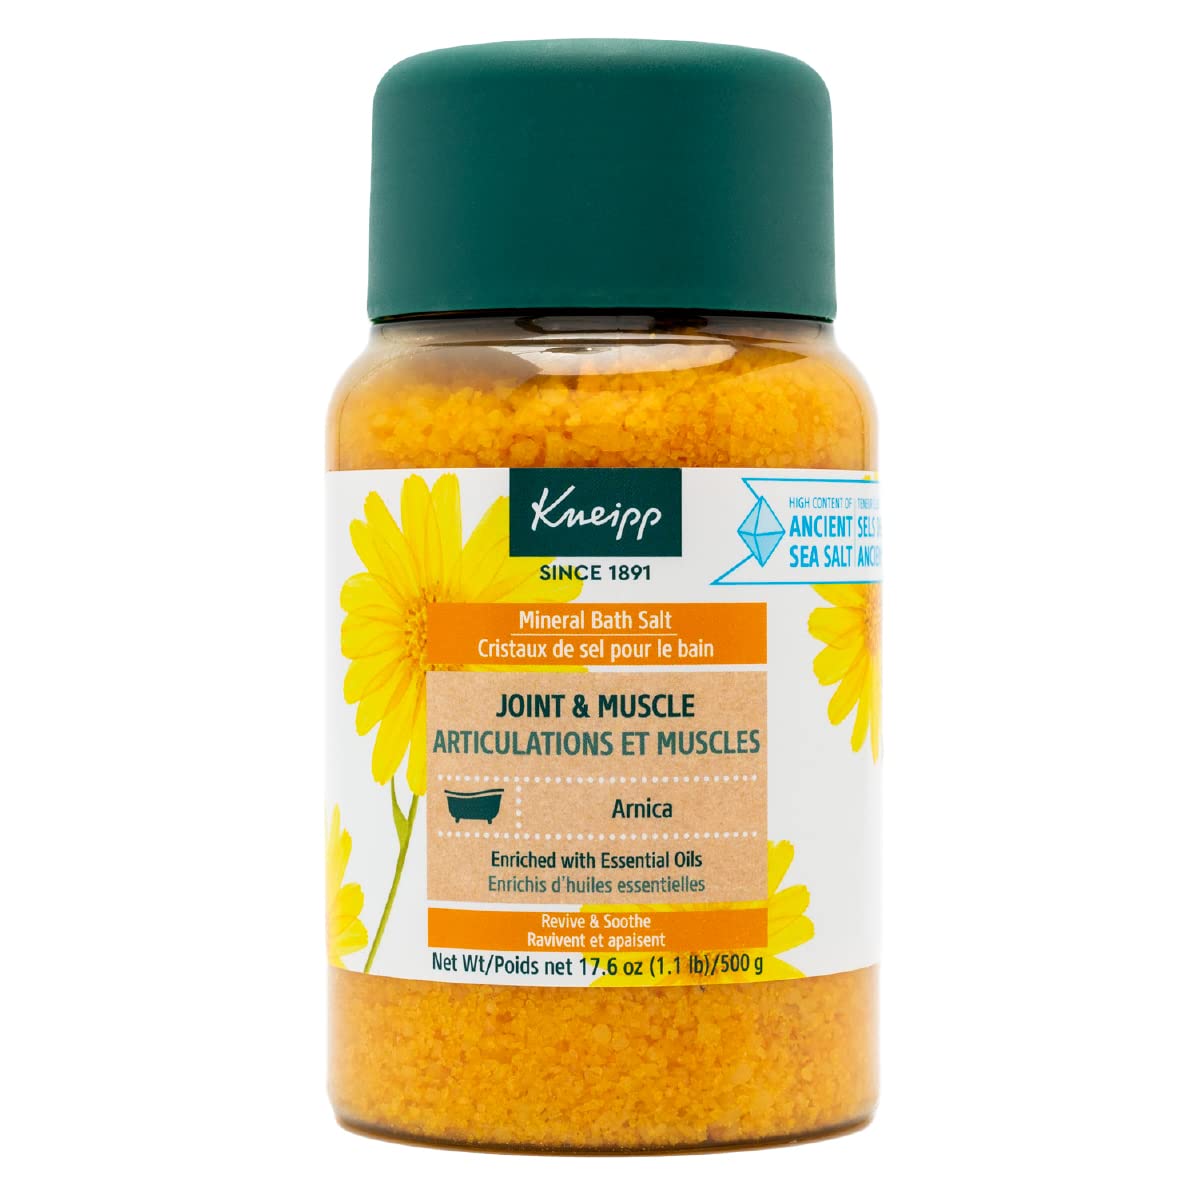 Kneipp Joint & Muscle Mineral Bath Salts With Arnica, Rejuvenate Joints, Muscles, 17.6 s For Up To 10 Baths